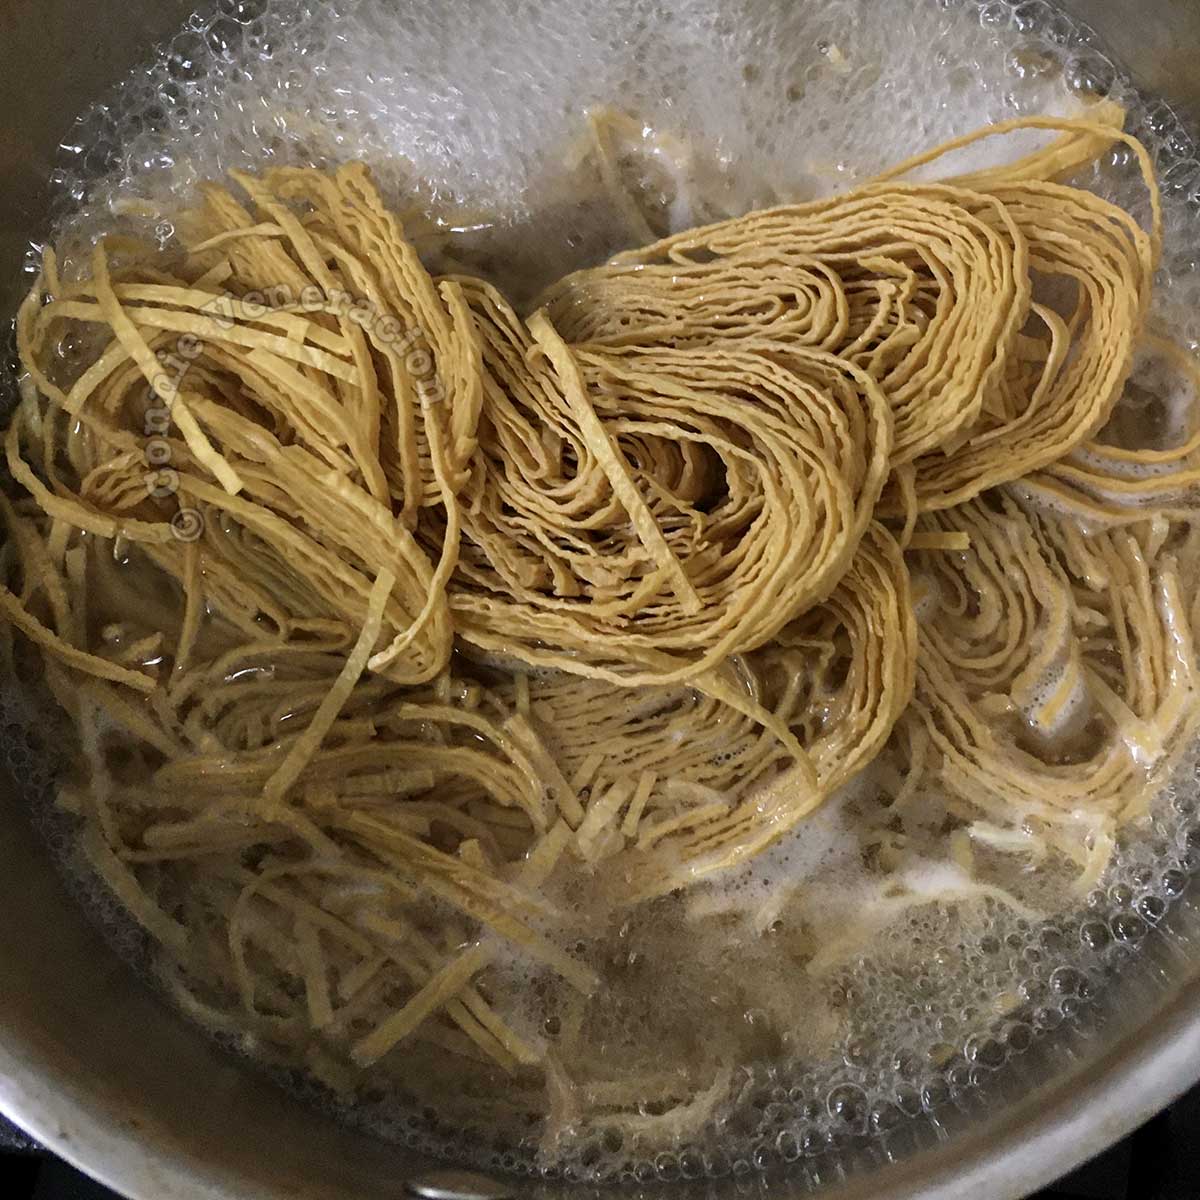 Boiling dried bean curd noodles